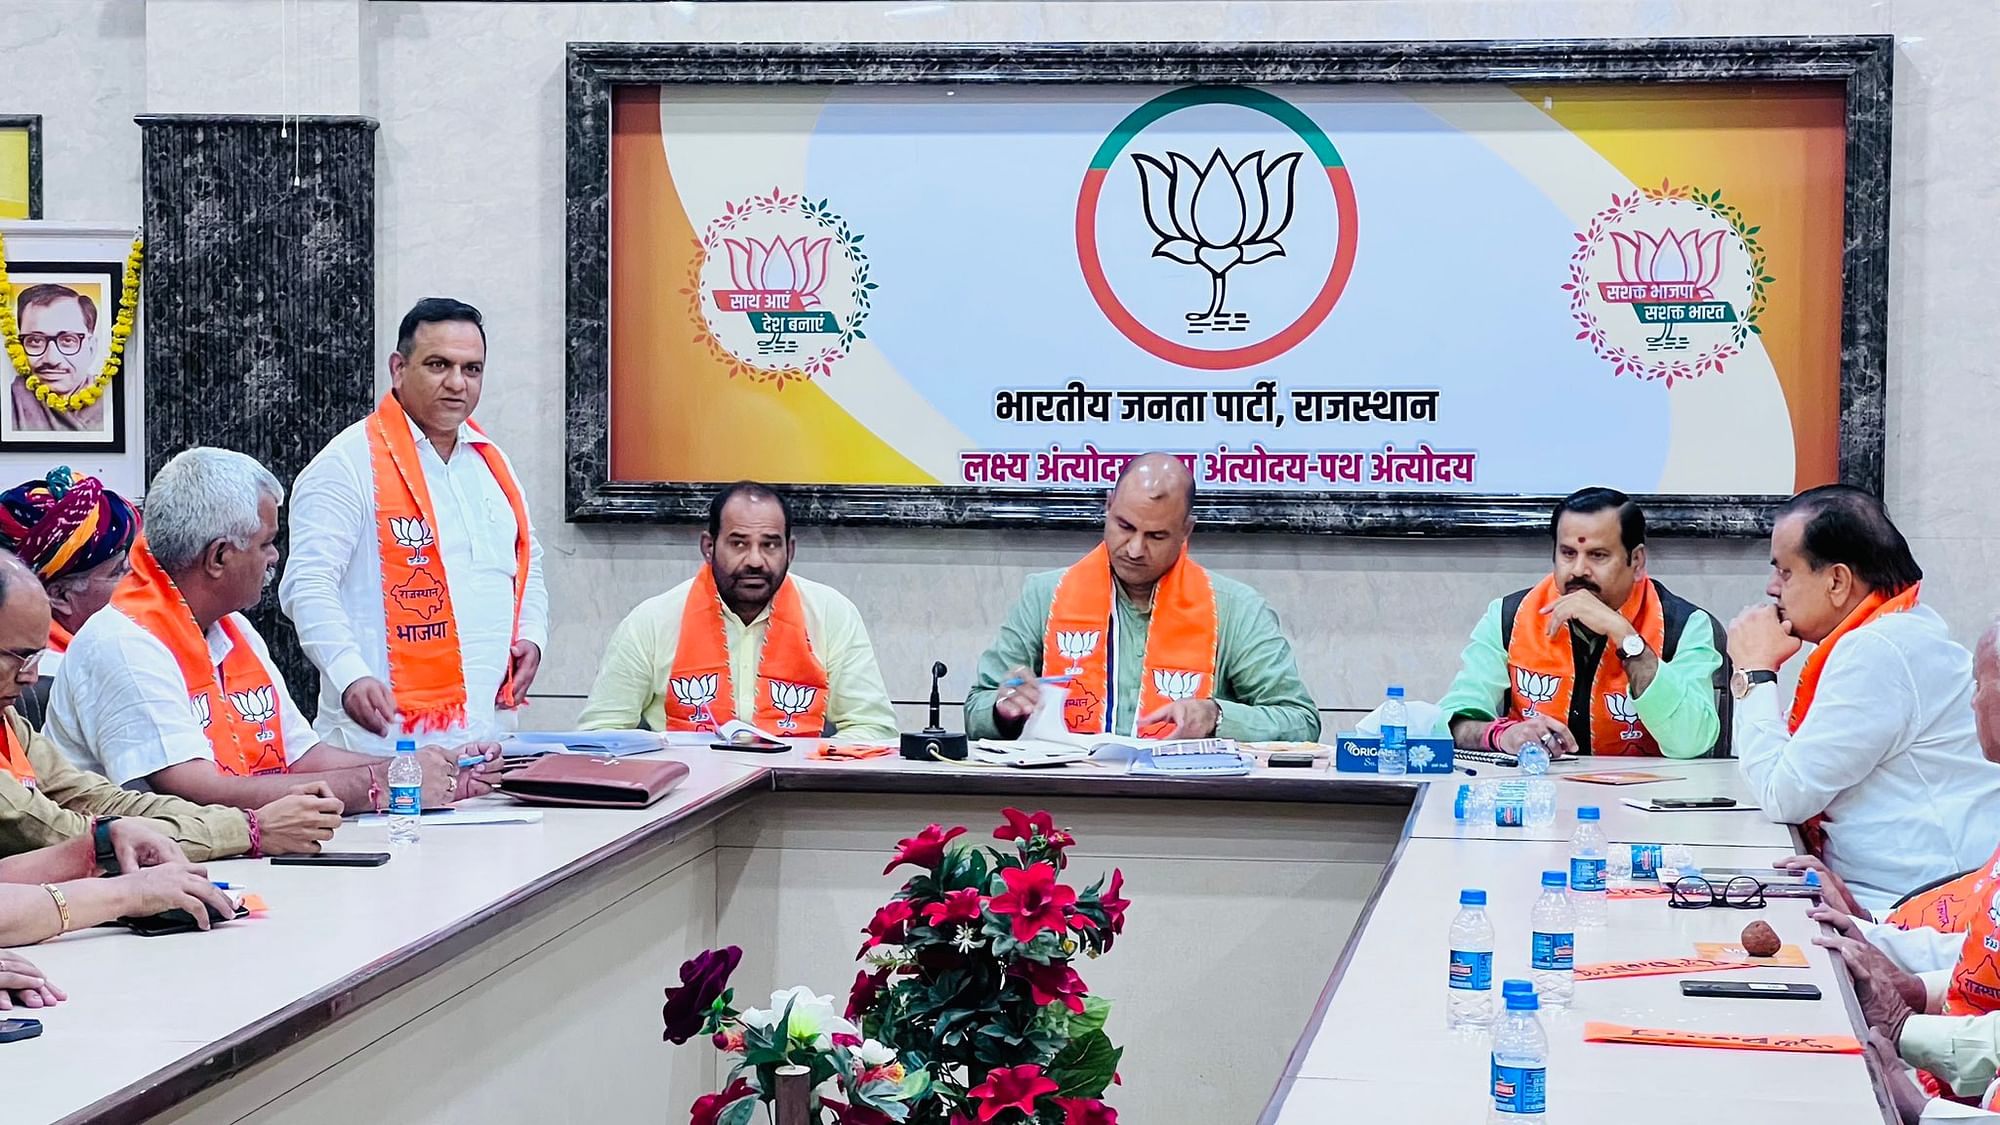 <div class="paragraphs"><p>The Bharatiya Janata Party has appointed South Delhi MP Ramesh Bidhuri as its in-charge for Rajasthan's Tonk district ahead of upcoming assembly elections.</p><p><br></p></div>